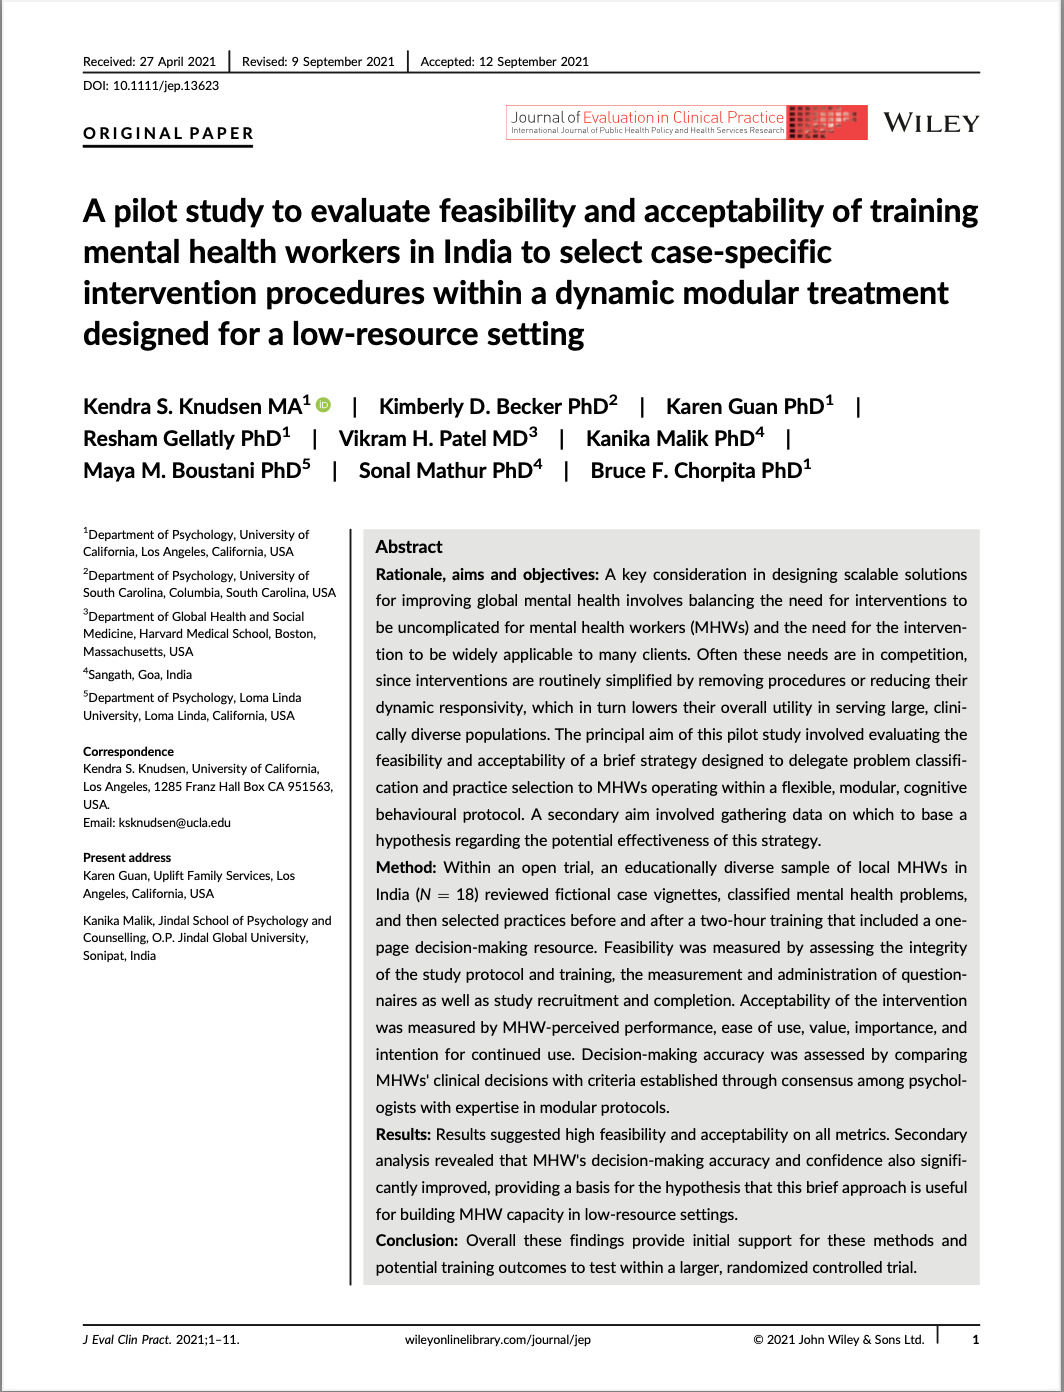 A pilot study to evaluate feasibility and acceptability of training mental health workers in India to select case-specific intervention procedures within a dynamic modular treatment designed for a low-resource setting